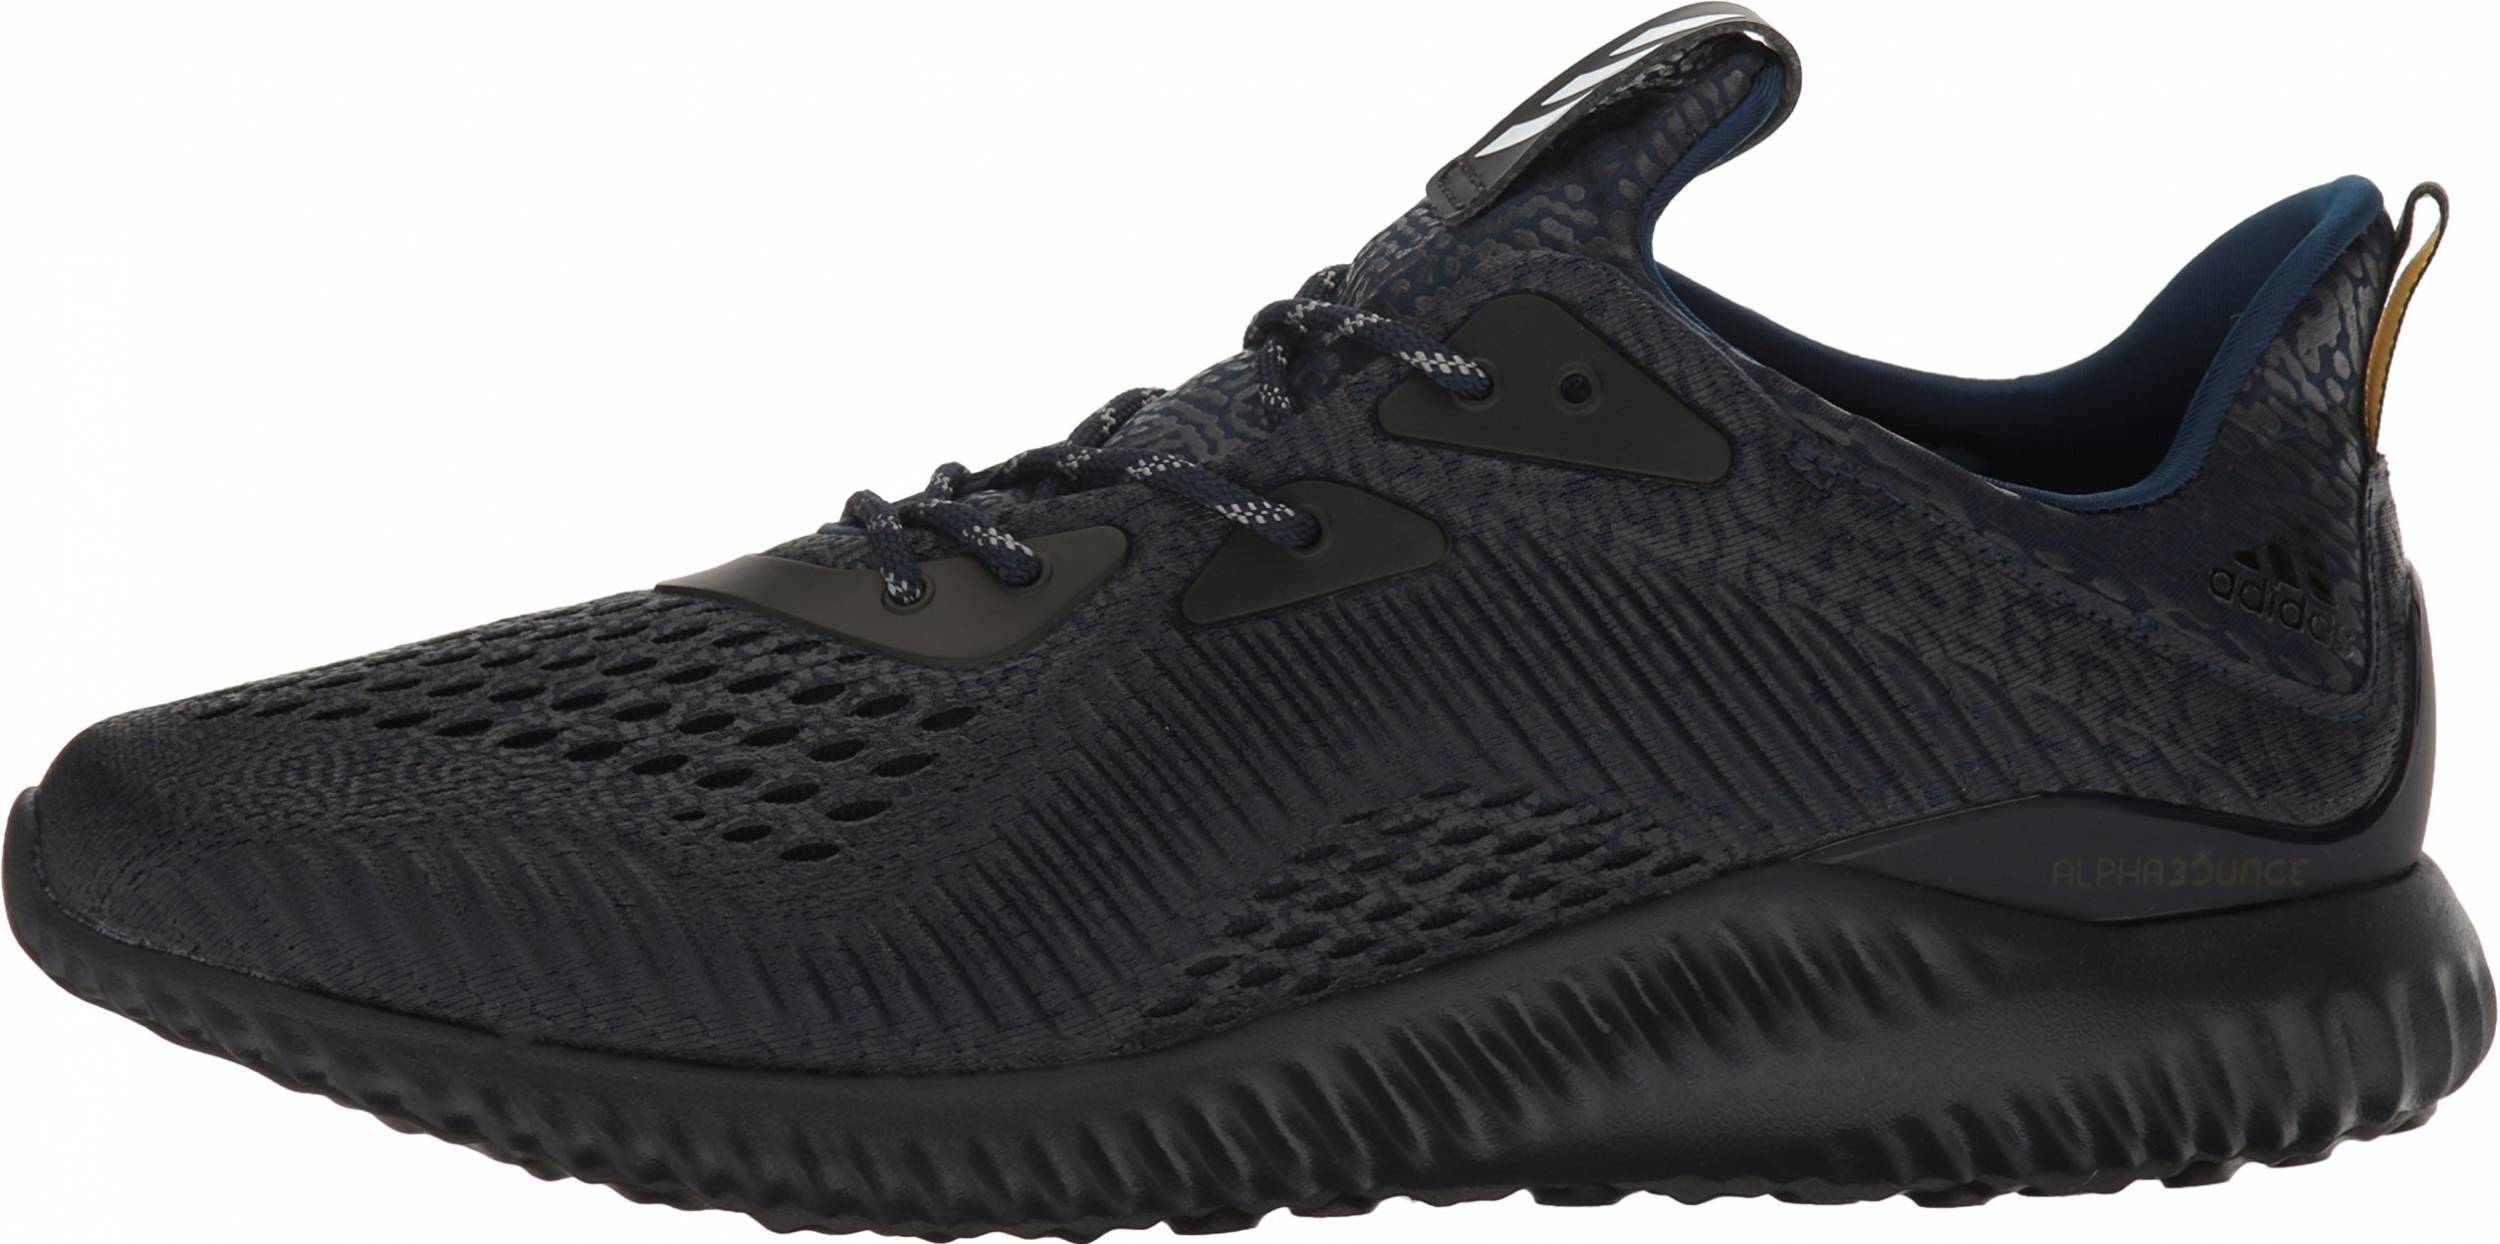 Adidas Alphabounce AMS Review Facts, Deals | RunRepeat